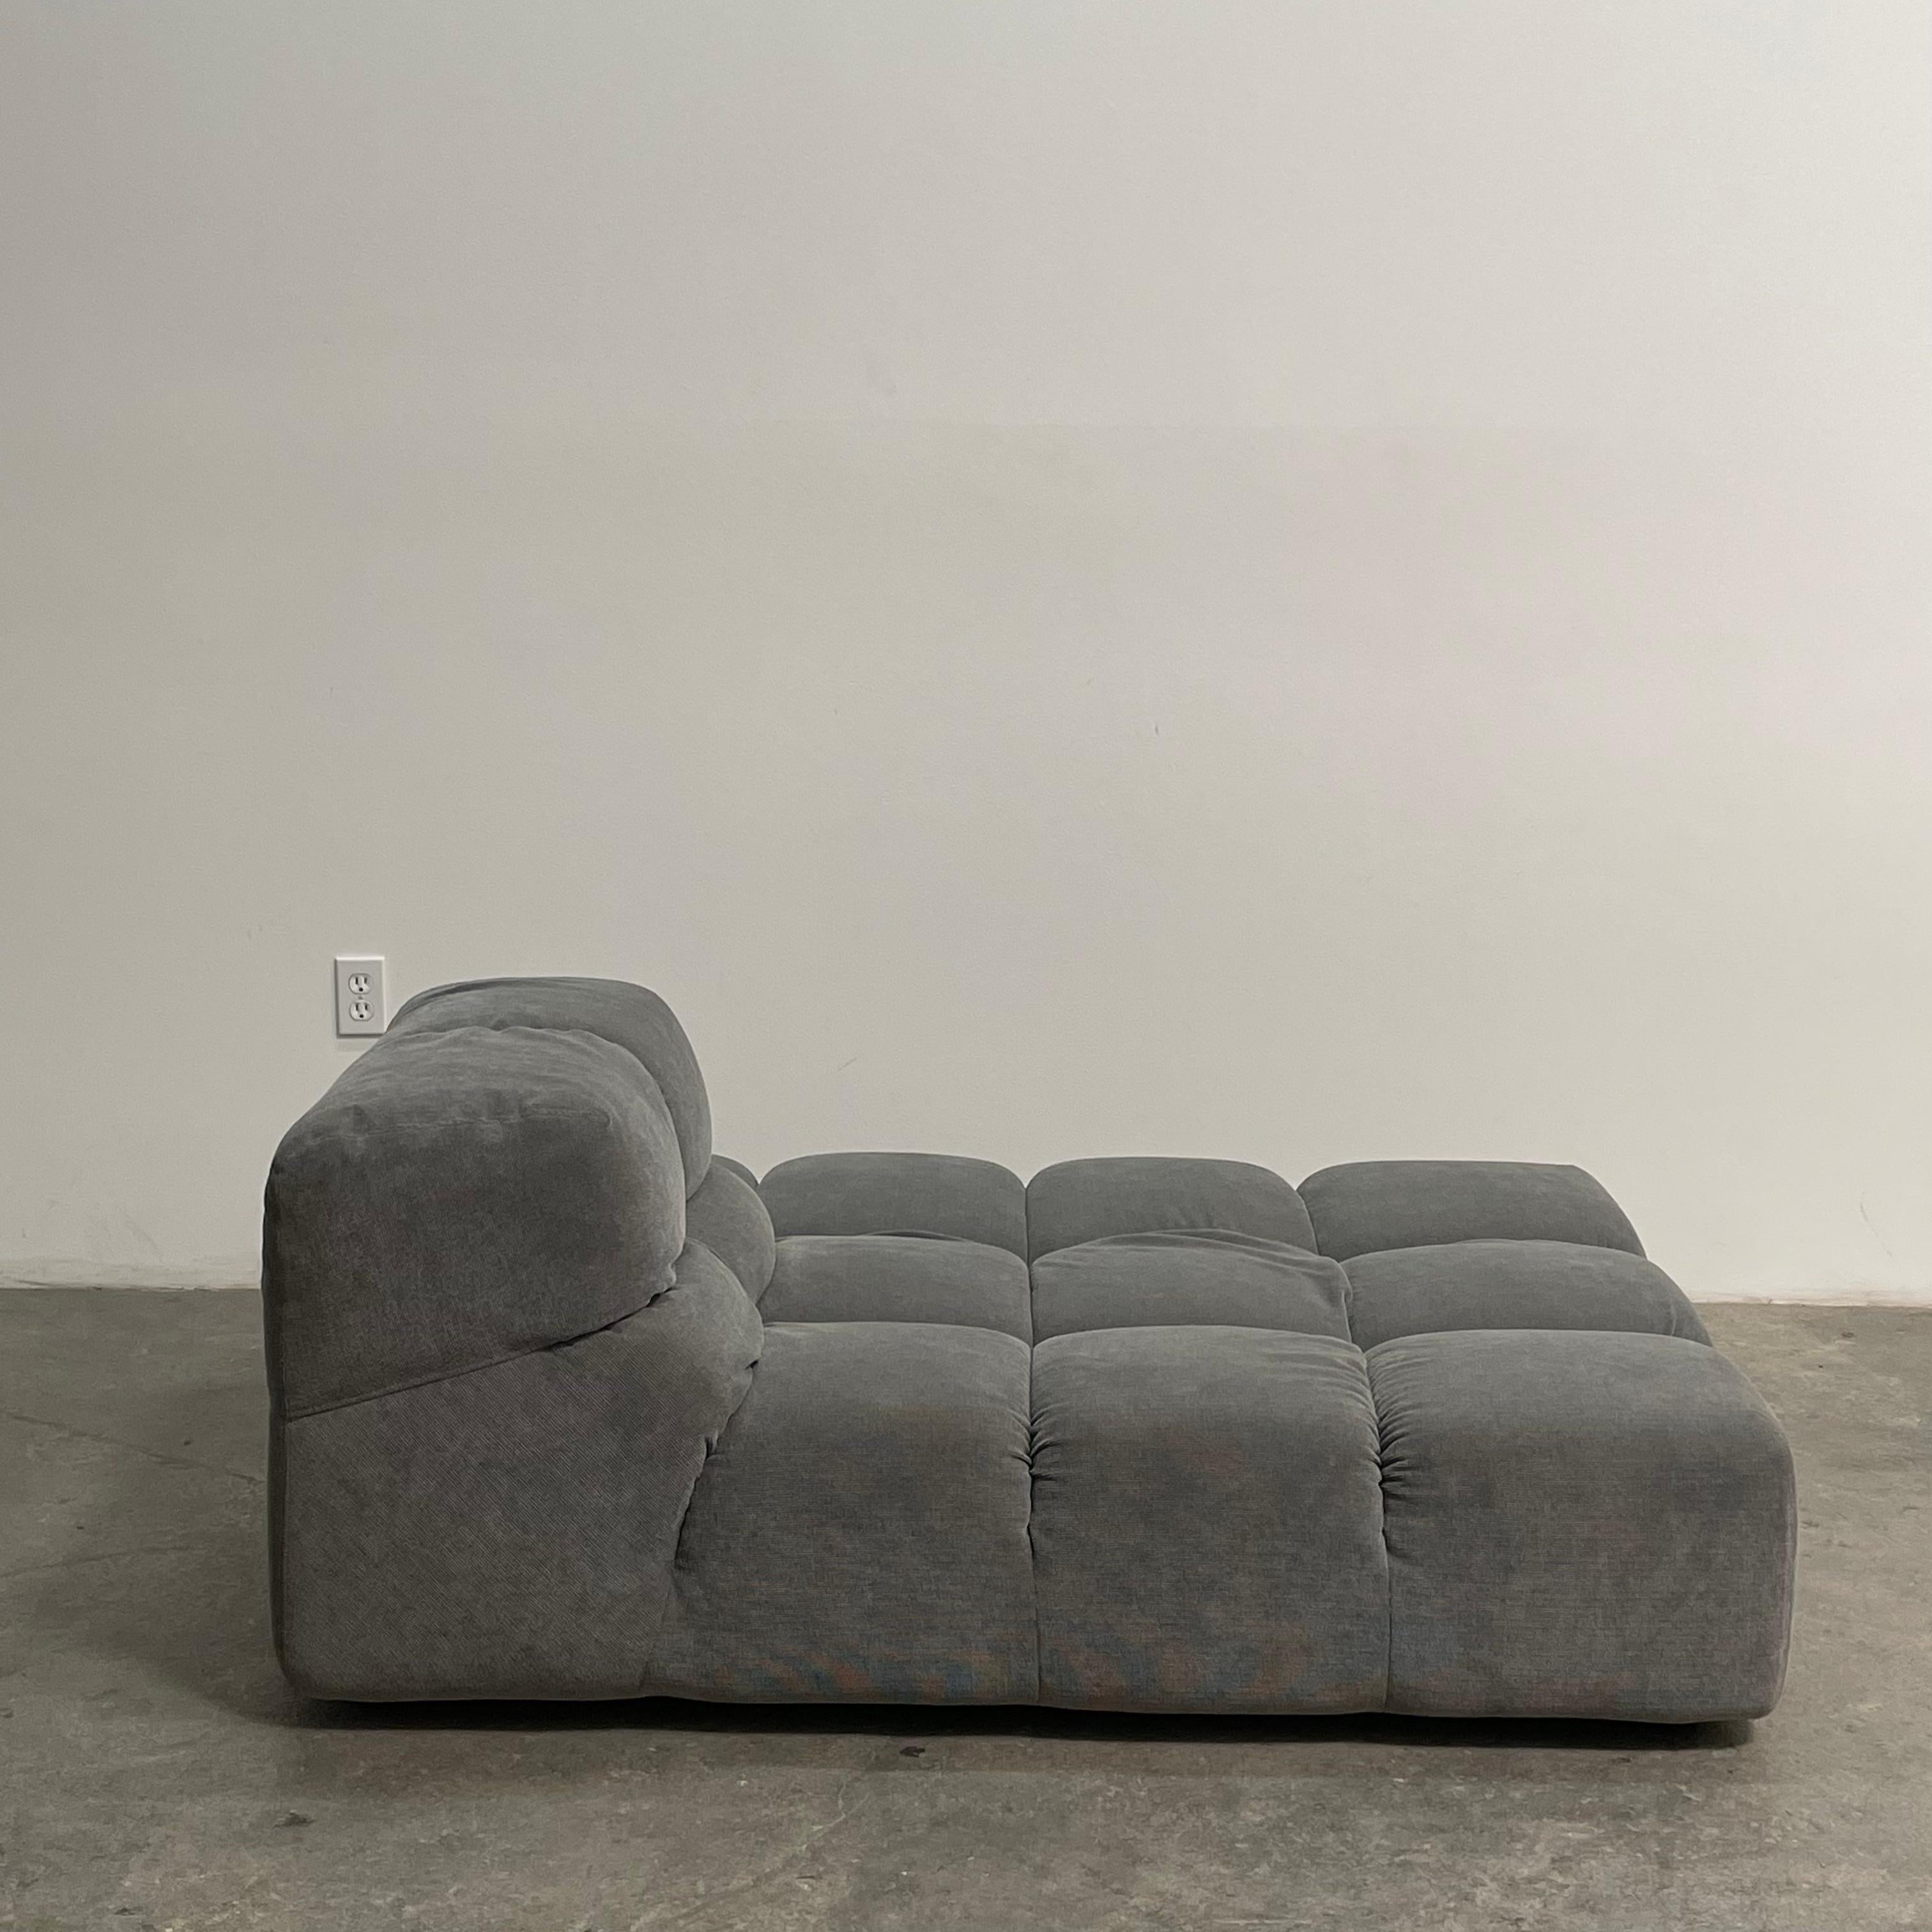 Tufty Time' 4-Piece Sectional Sofa by Patricia Urquiola for B&B Italia —  THE MILLIE VINTAGE